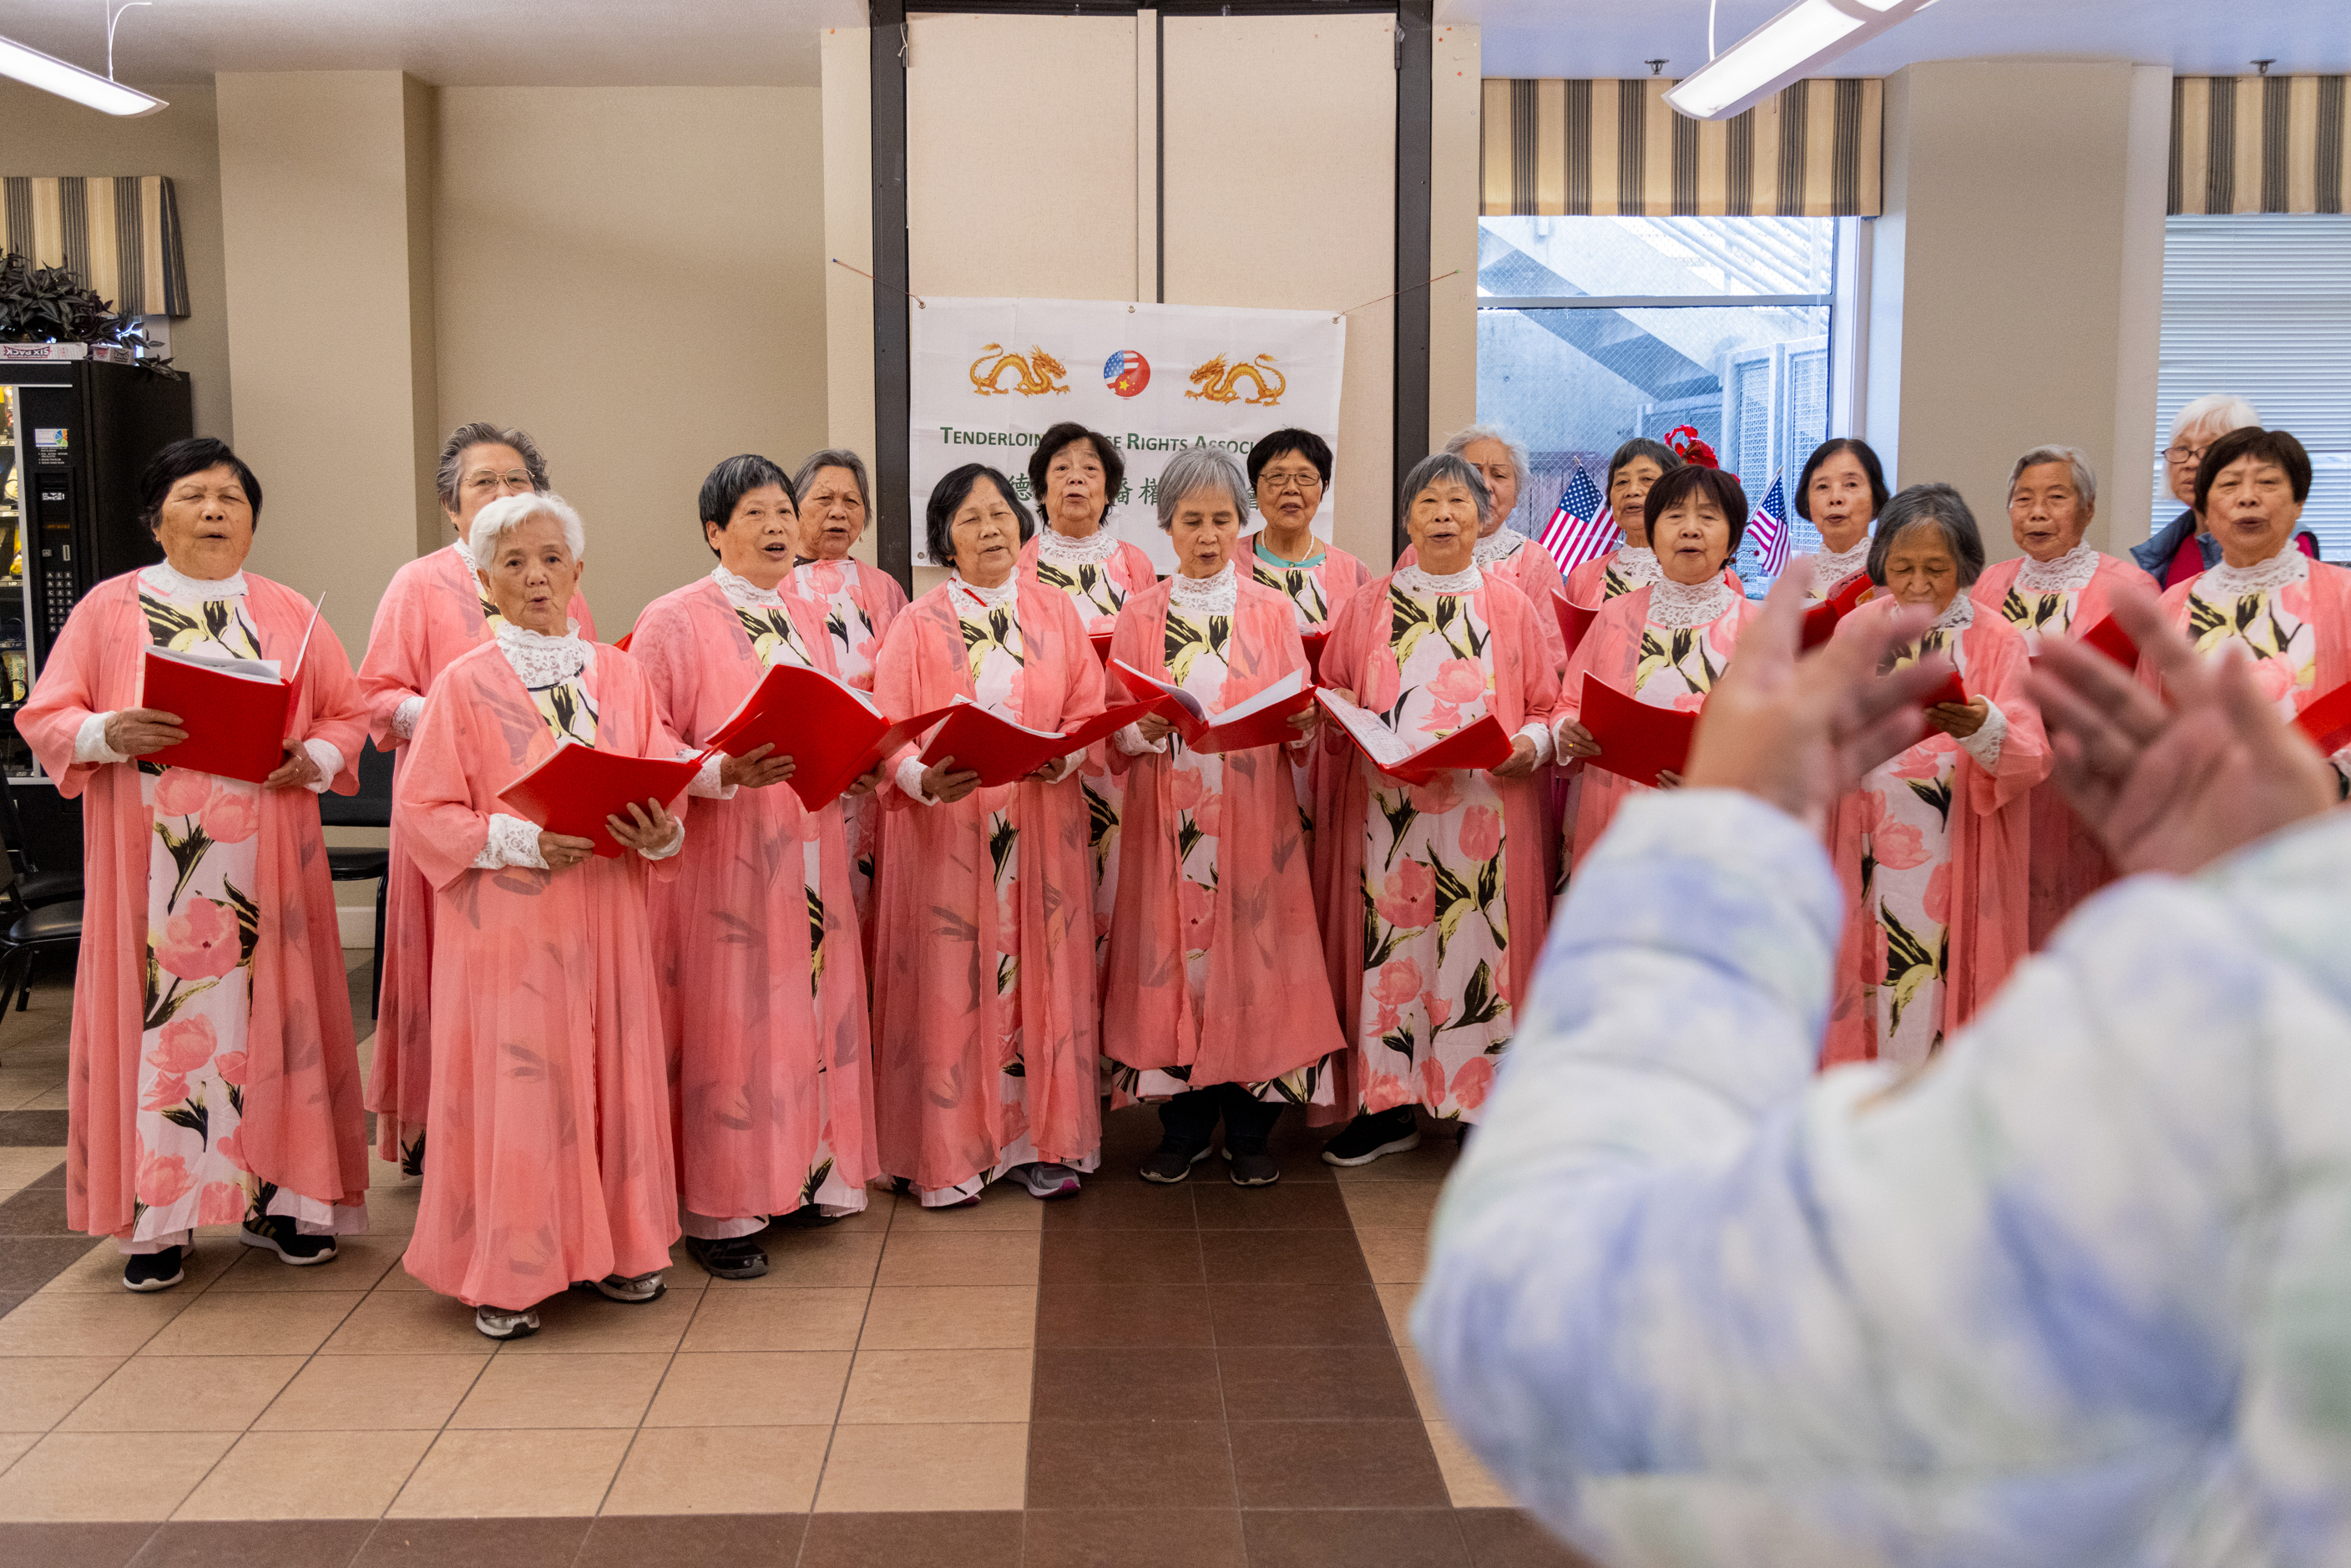 A choir of elderly women in pink floral robes sing passionately, holding red folders, conducted by a person with a raised hand, indoors.